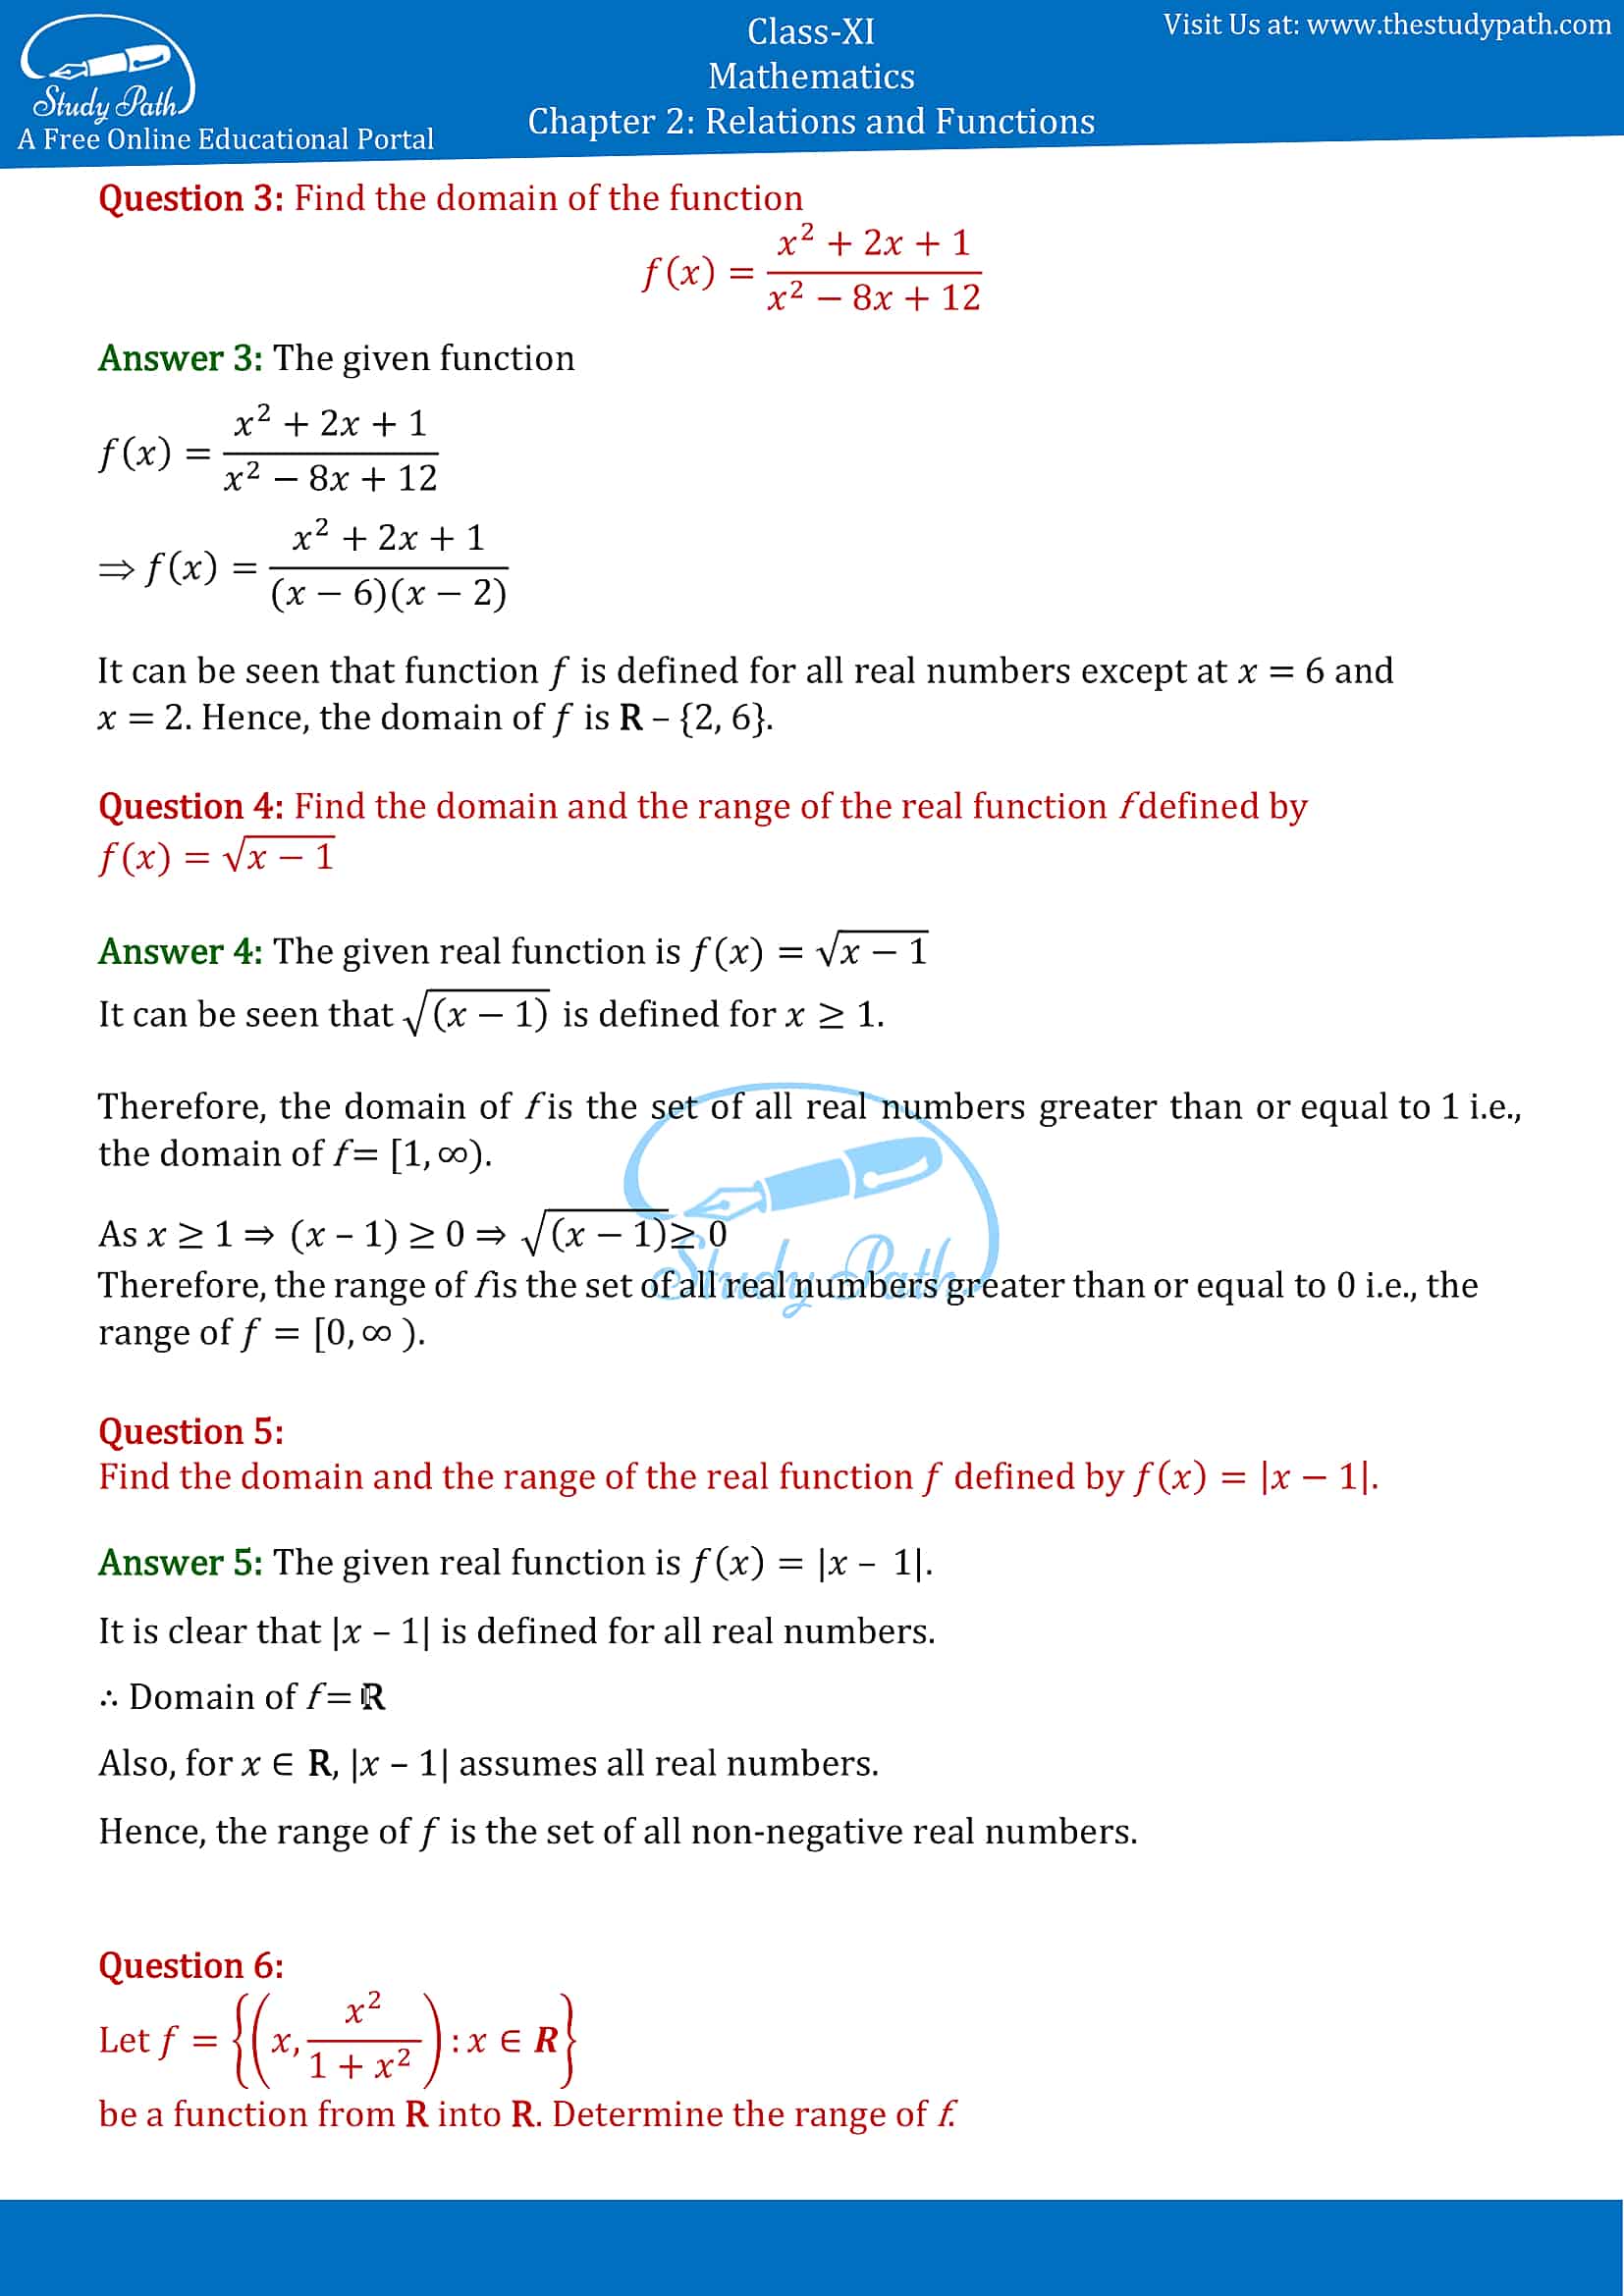 case study questions for class 11 maths chapter 2